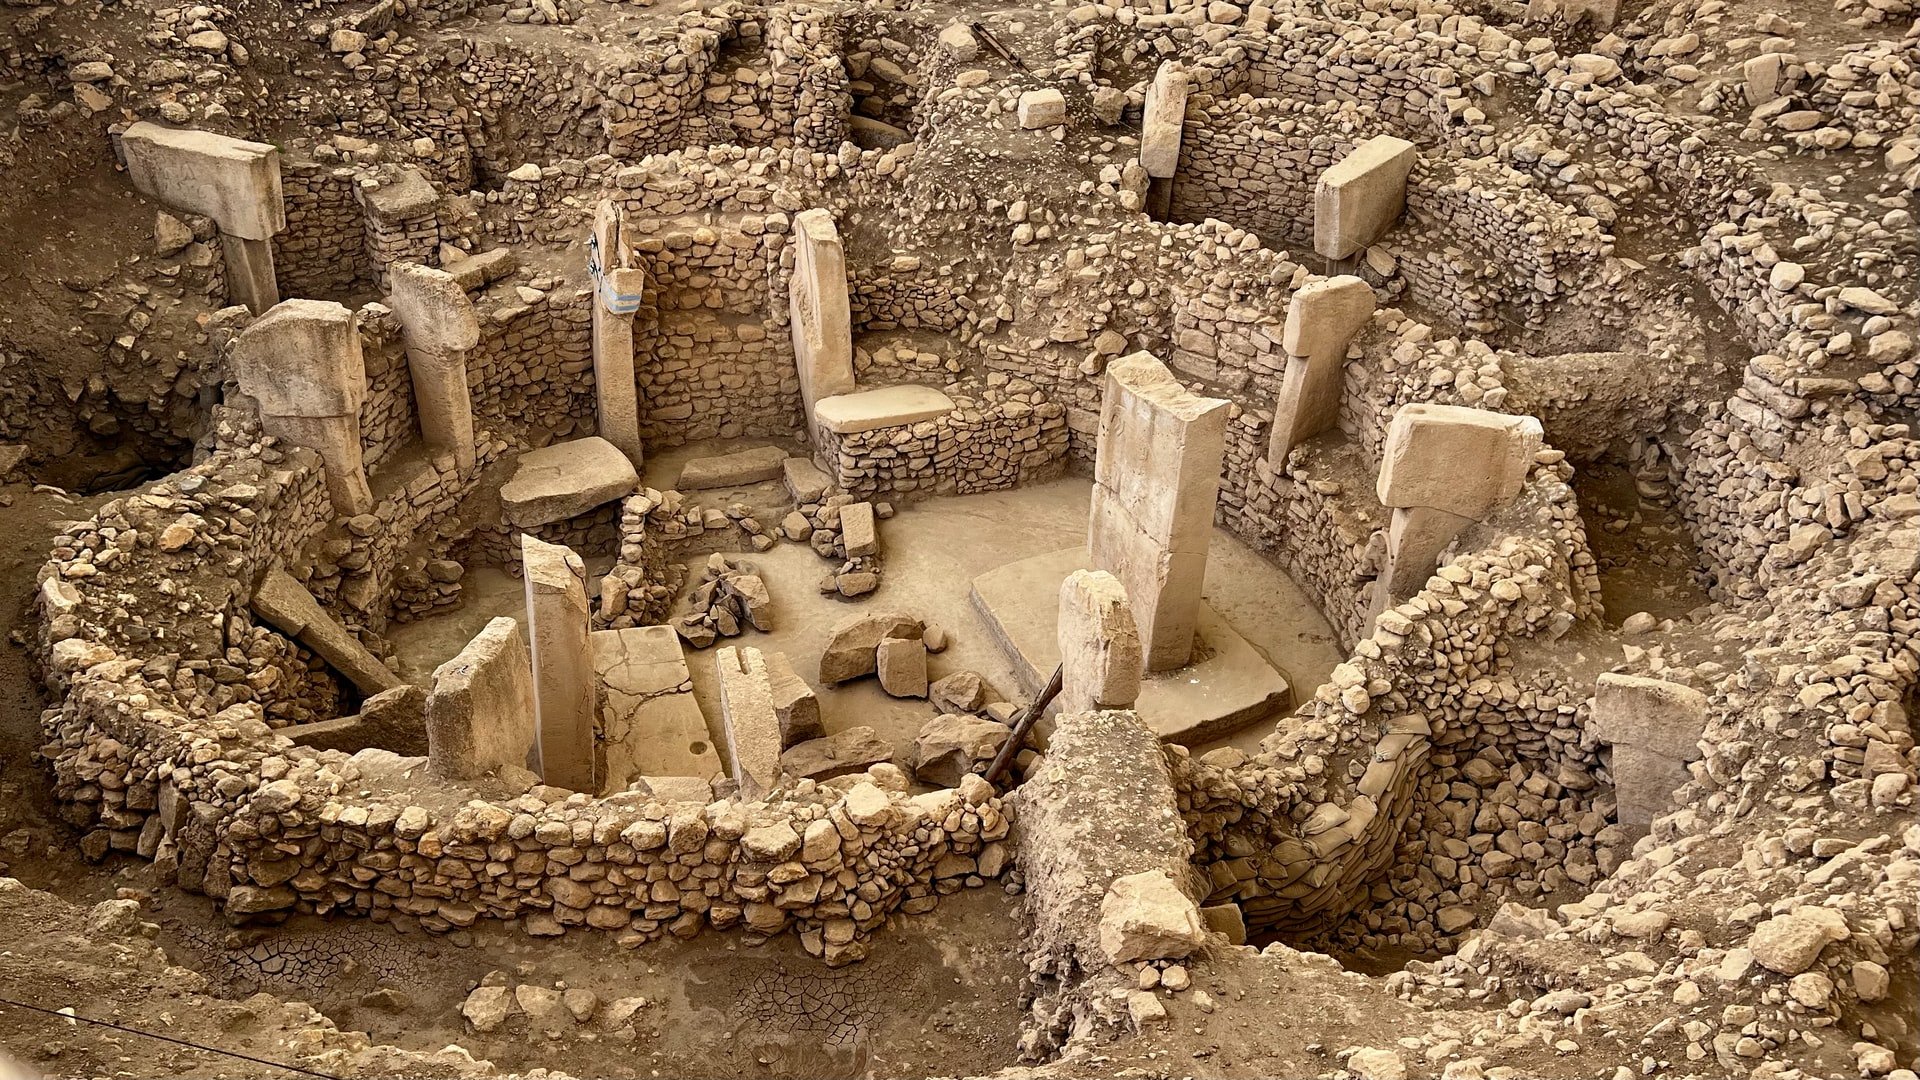 This image shows ancient ruins in Gobekli Tepe, one of the lesser-known historic sites in Turkey.